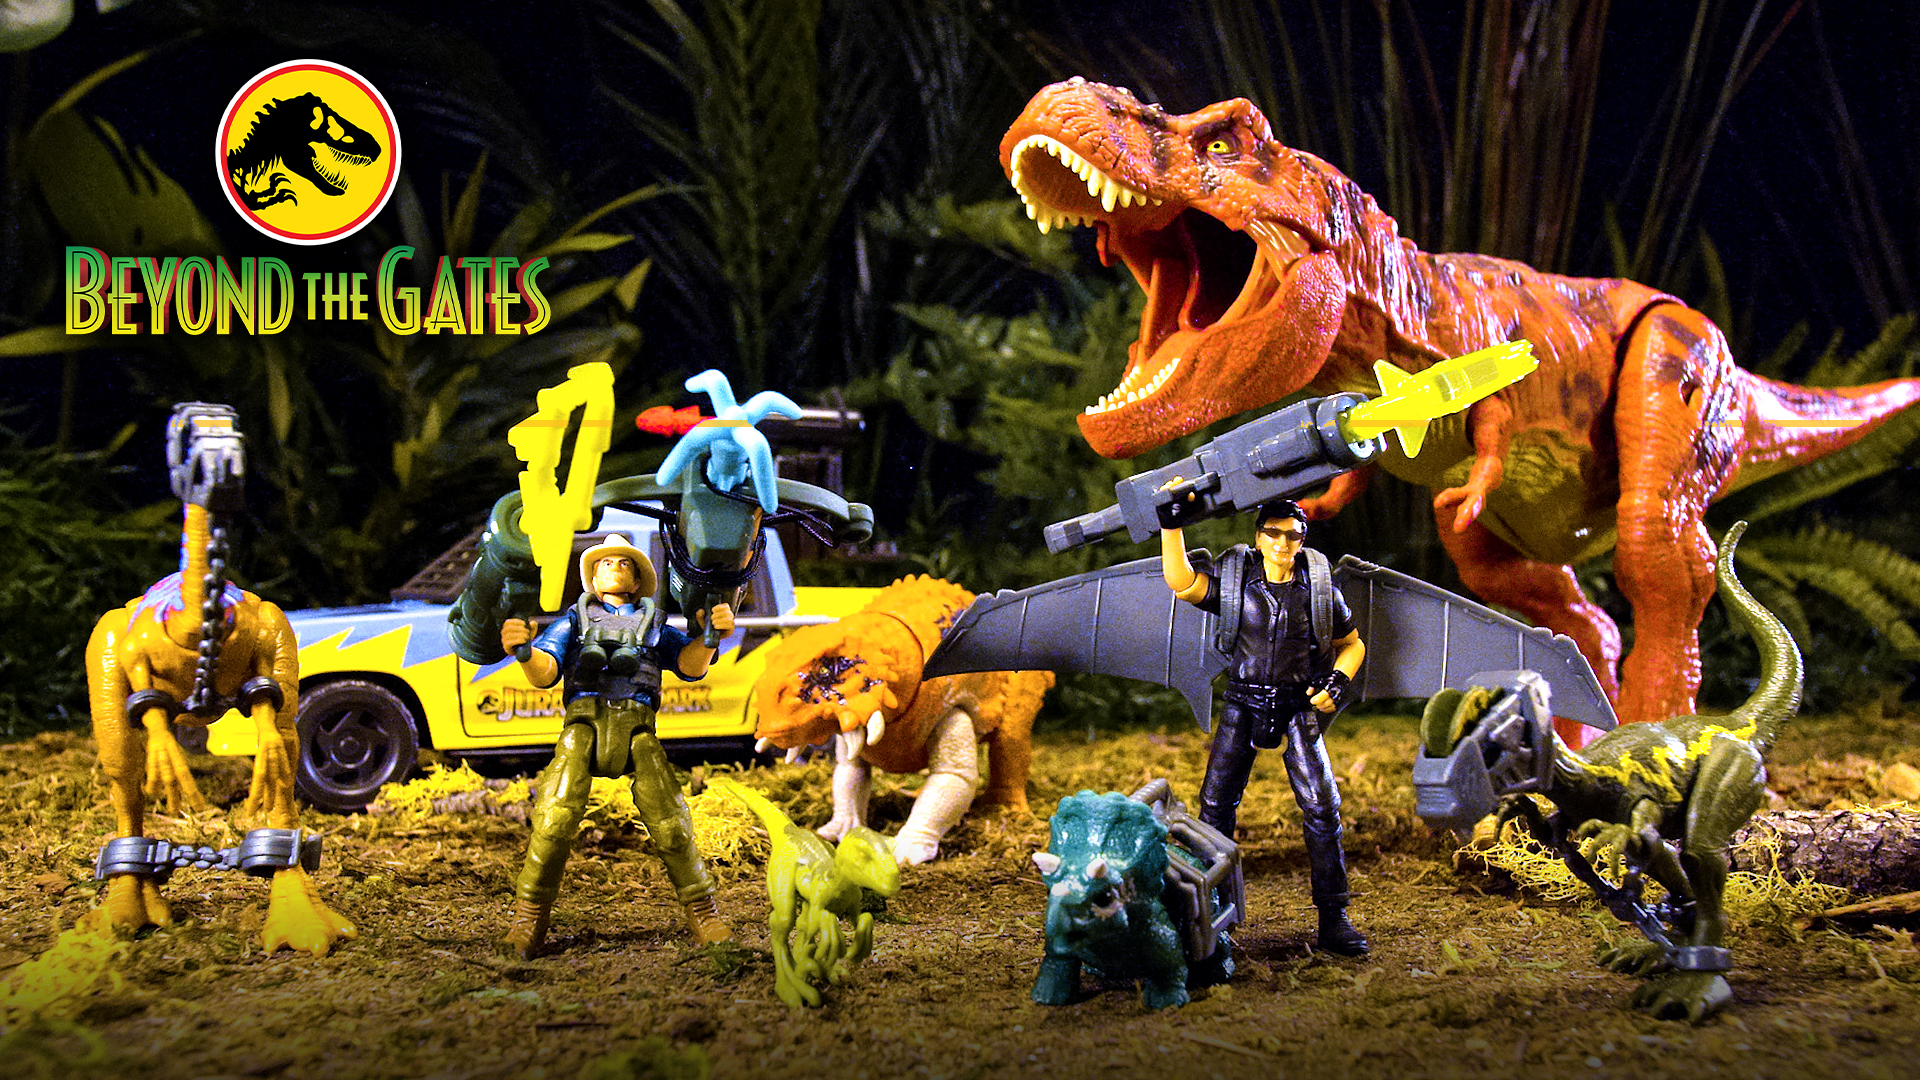 Beyond The Gates Returns and Unveils Mattel’s ’93 Classic Jurassic Park Collection!